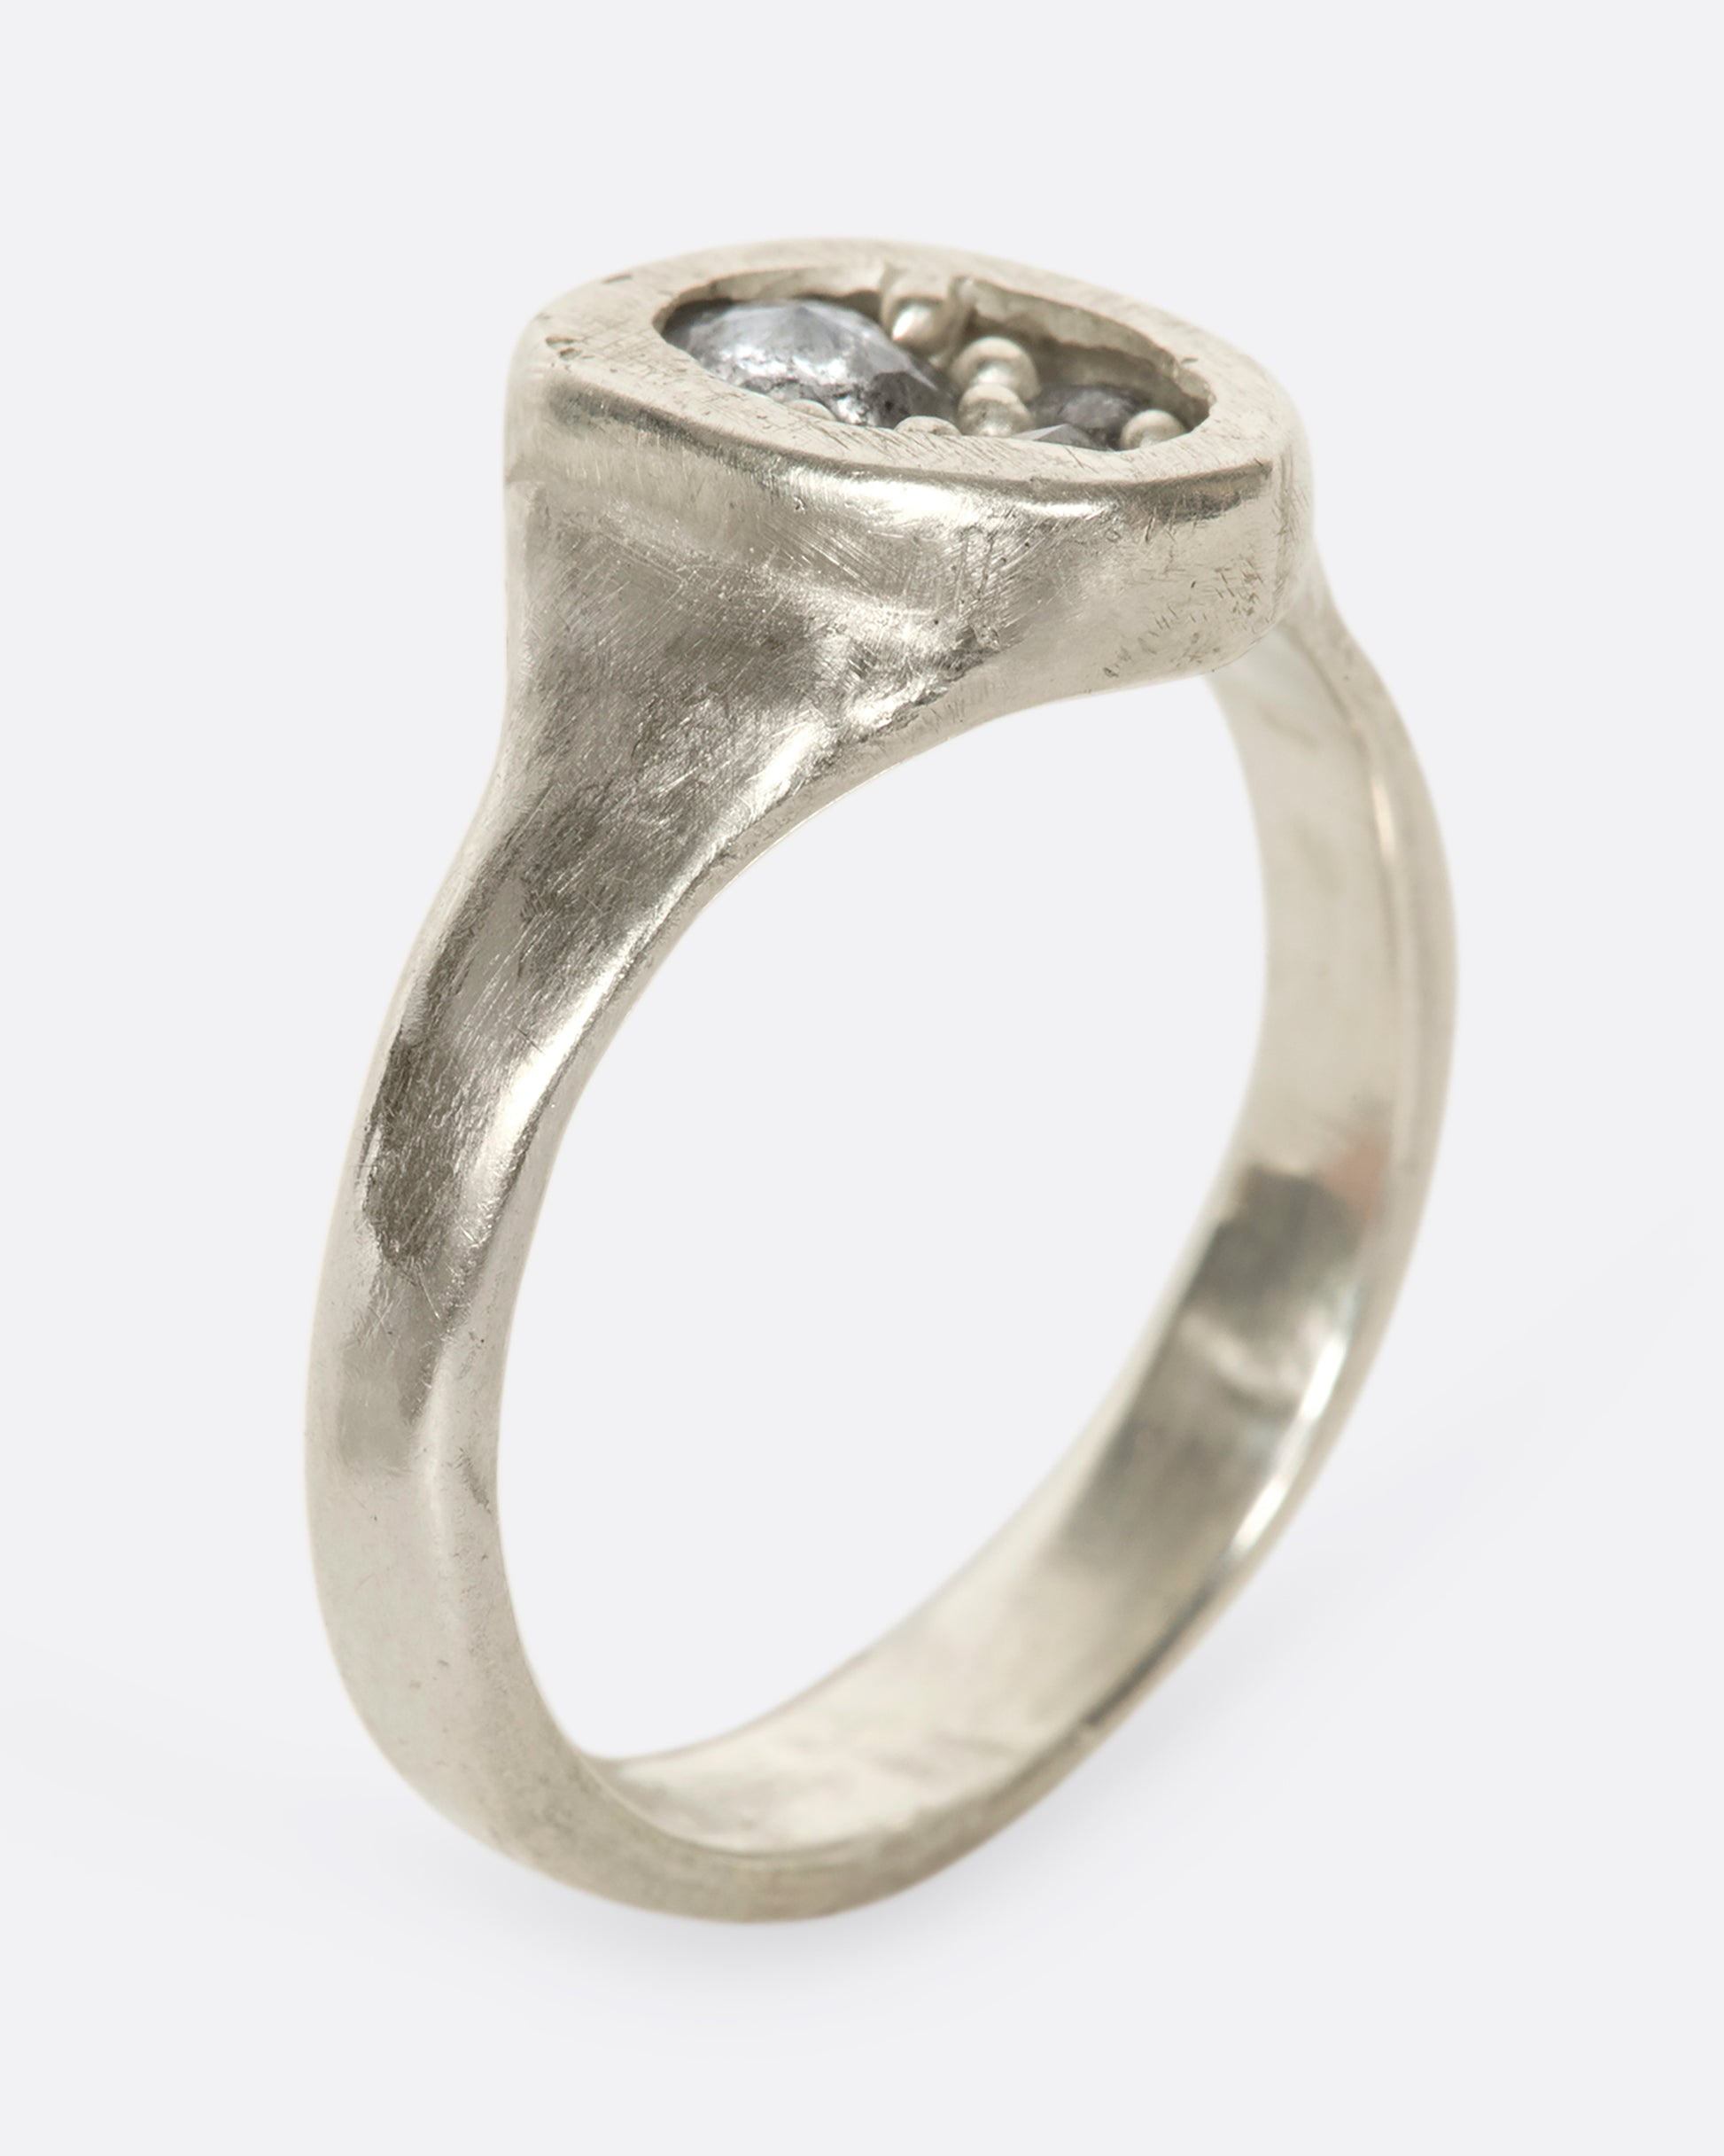 An oval silver ring with grey diamonds sitting upright on its band.